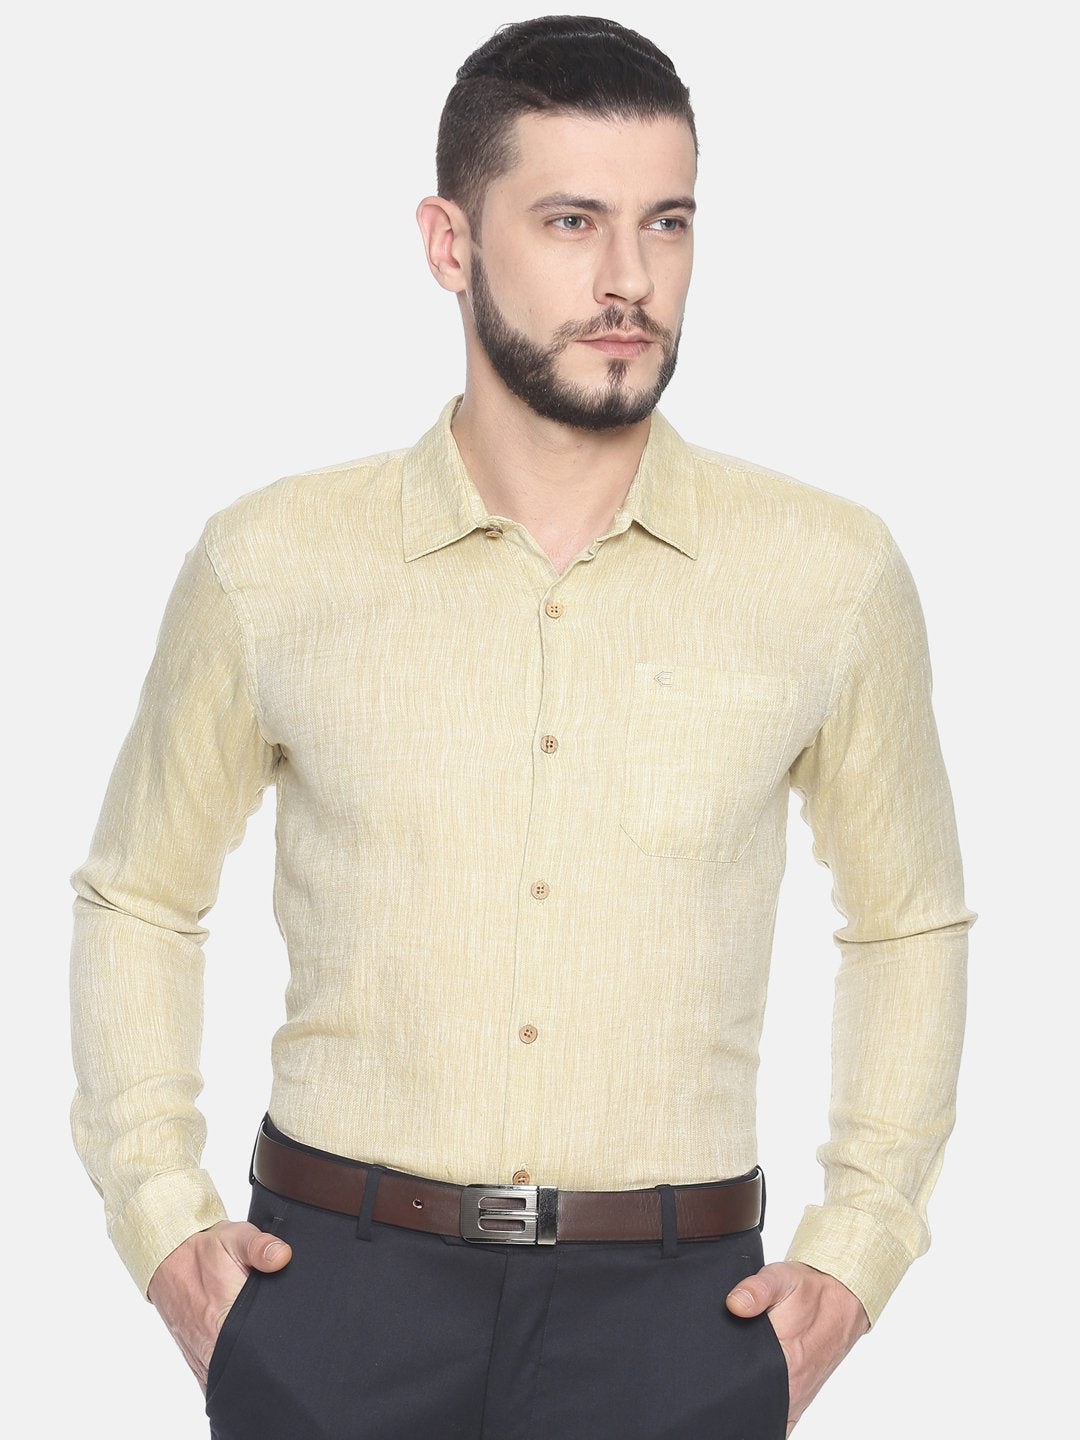 Buy Fawn Colour Slim Fit Hemp Formal Shirt Online in India ...